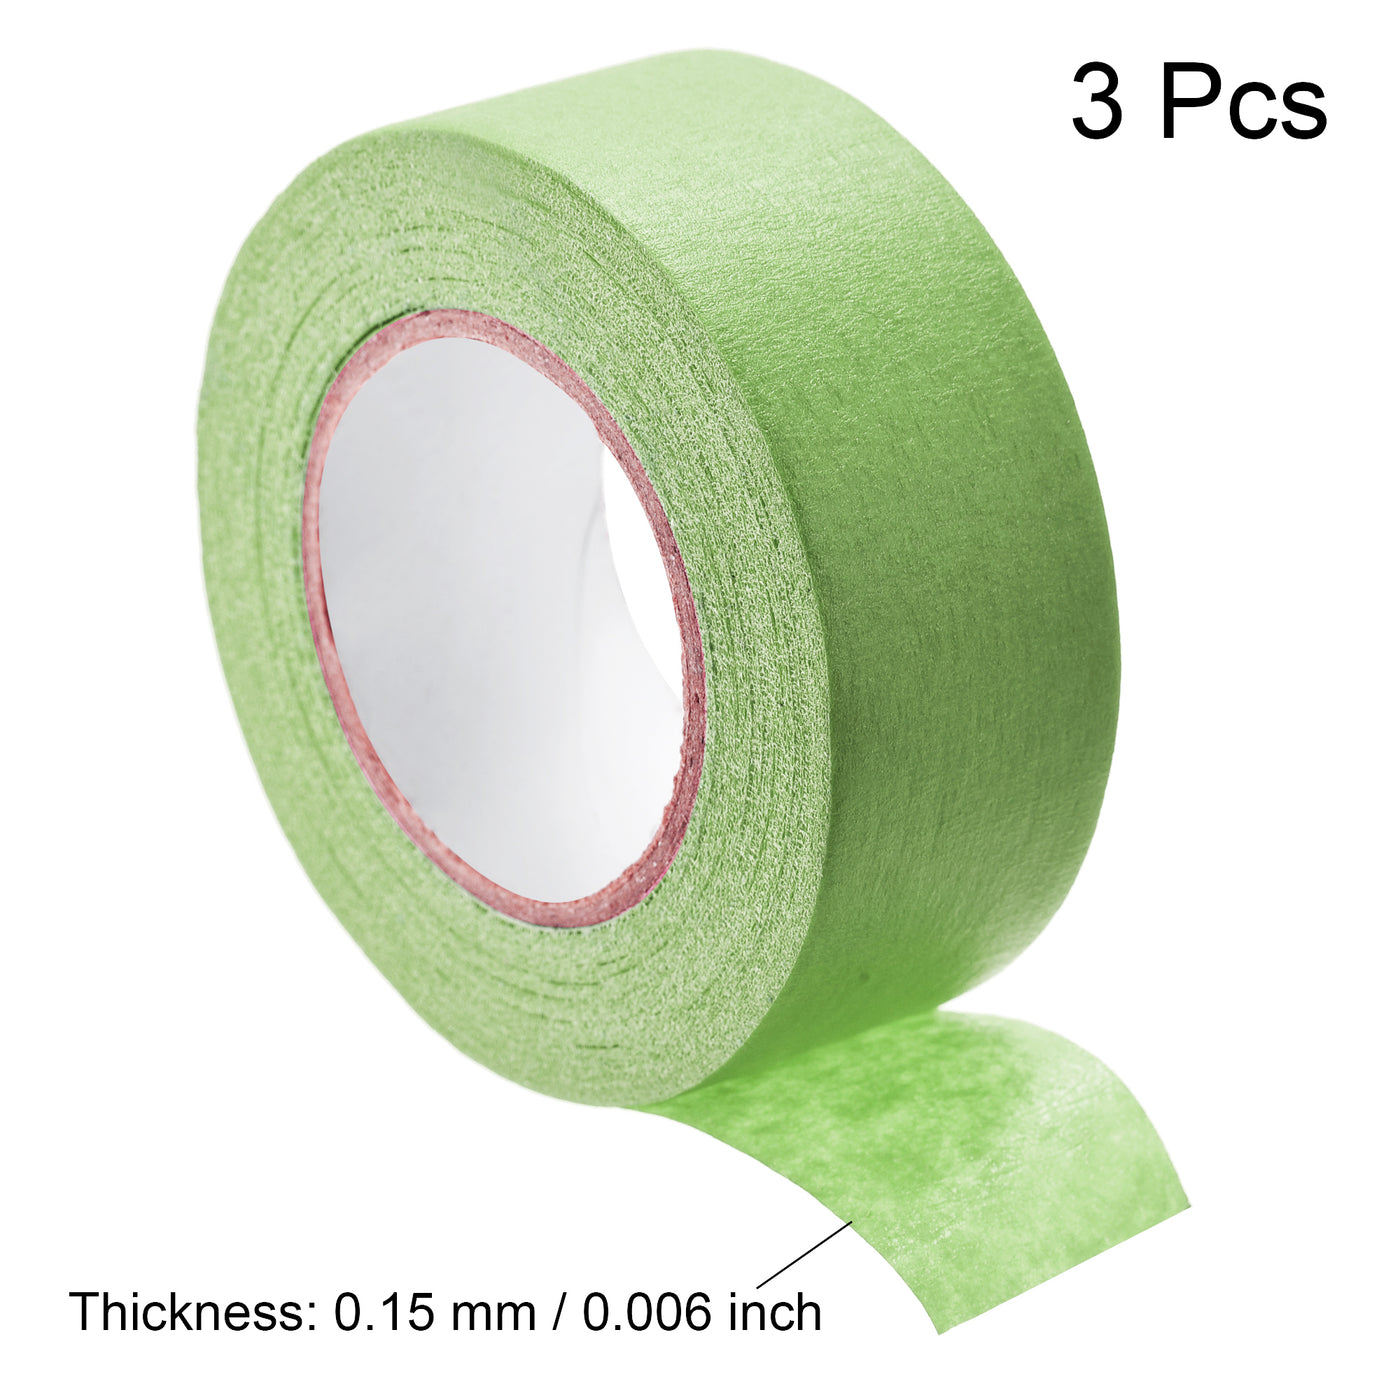 uxcell Uxcell 3Pcs 25mm 1 inch Wide 20m 21 Yards Masking Tape Painters Tape Rolls Light Green